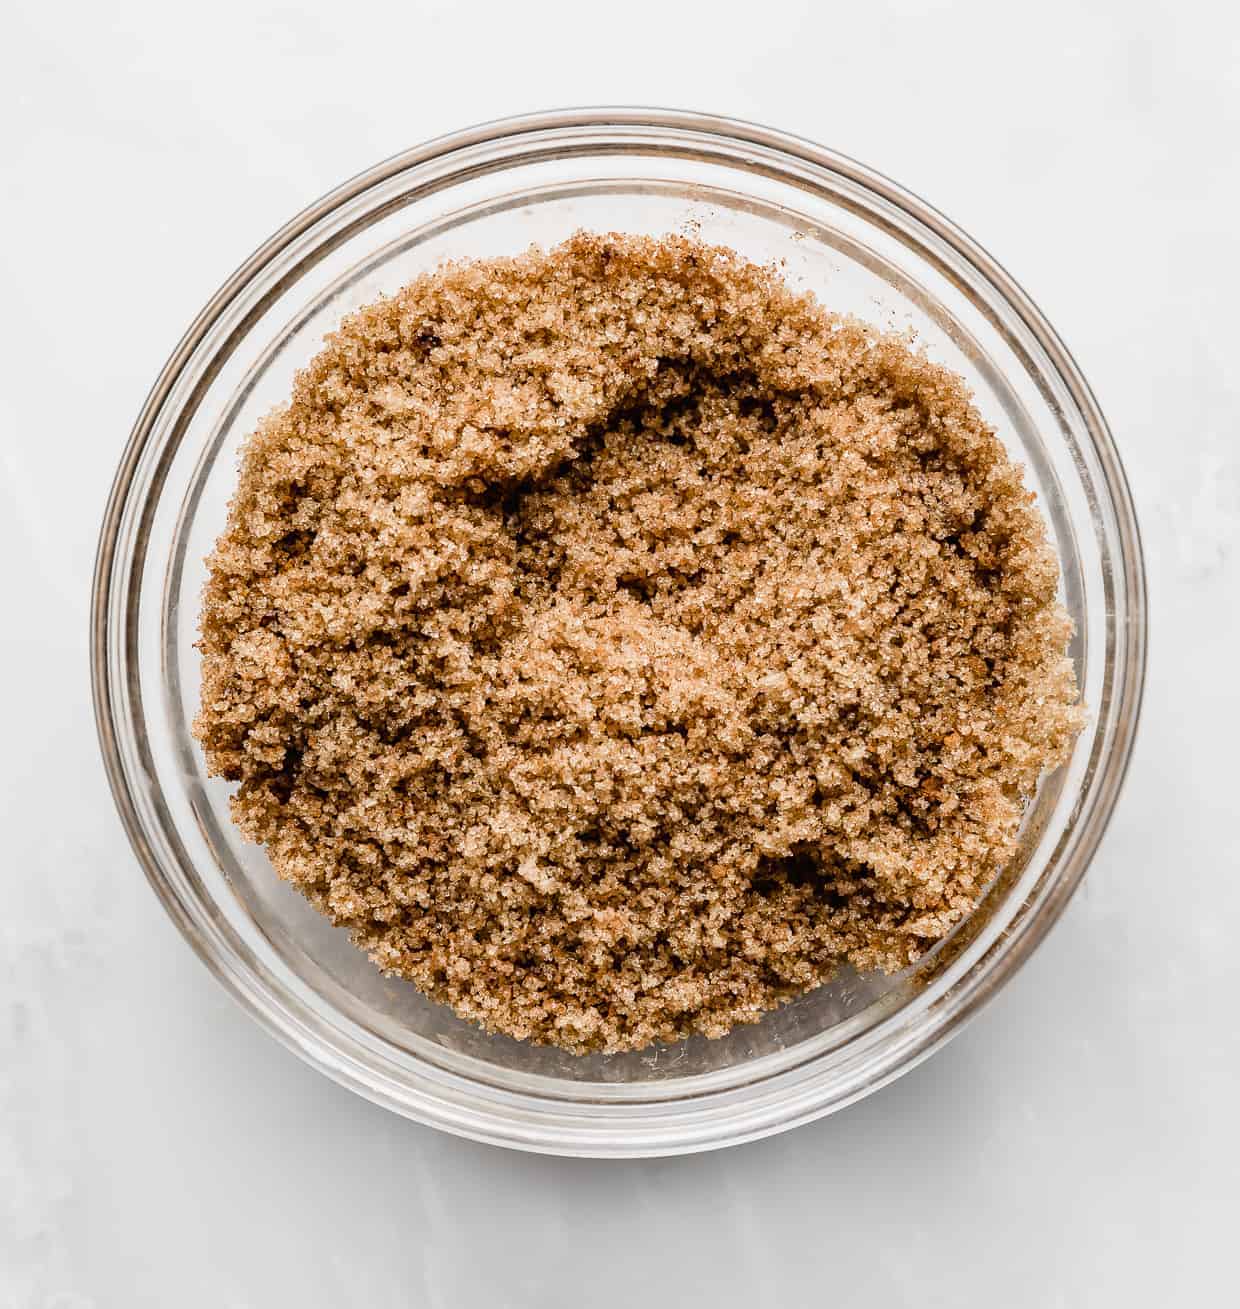 Brown sugar and cinnamon mixture in a glass bowl.